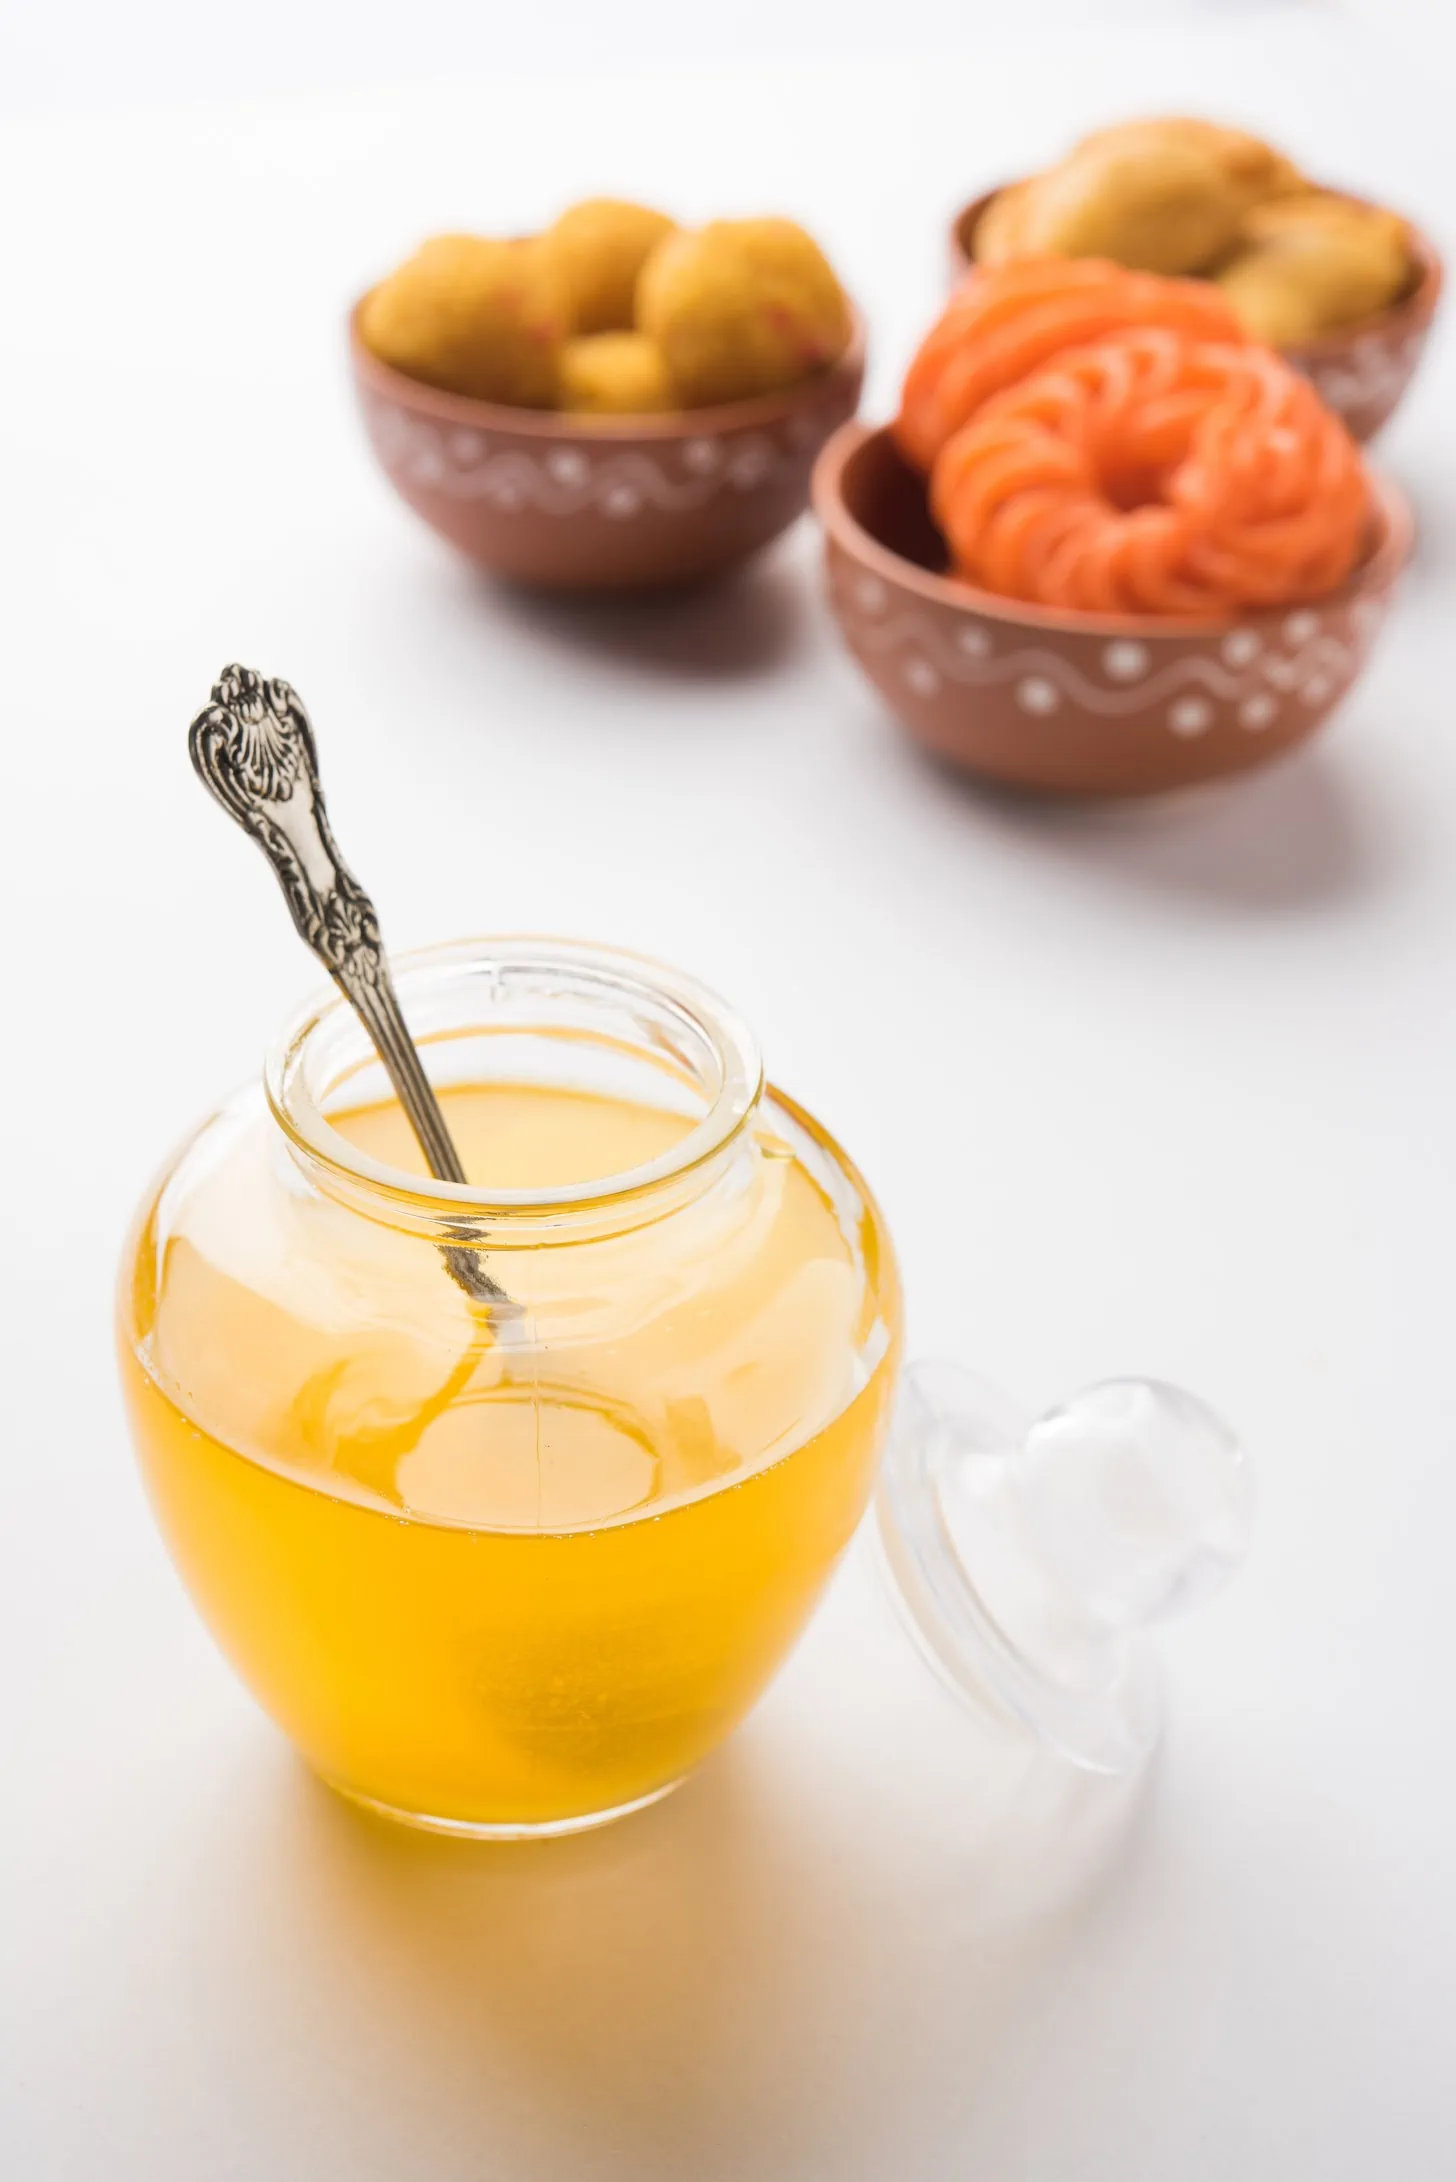 a jar of melted ghee with bowls of traditional Indian sweets in the background.